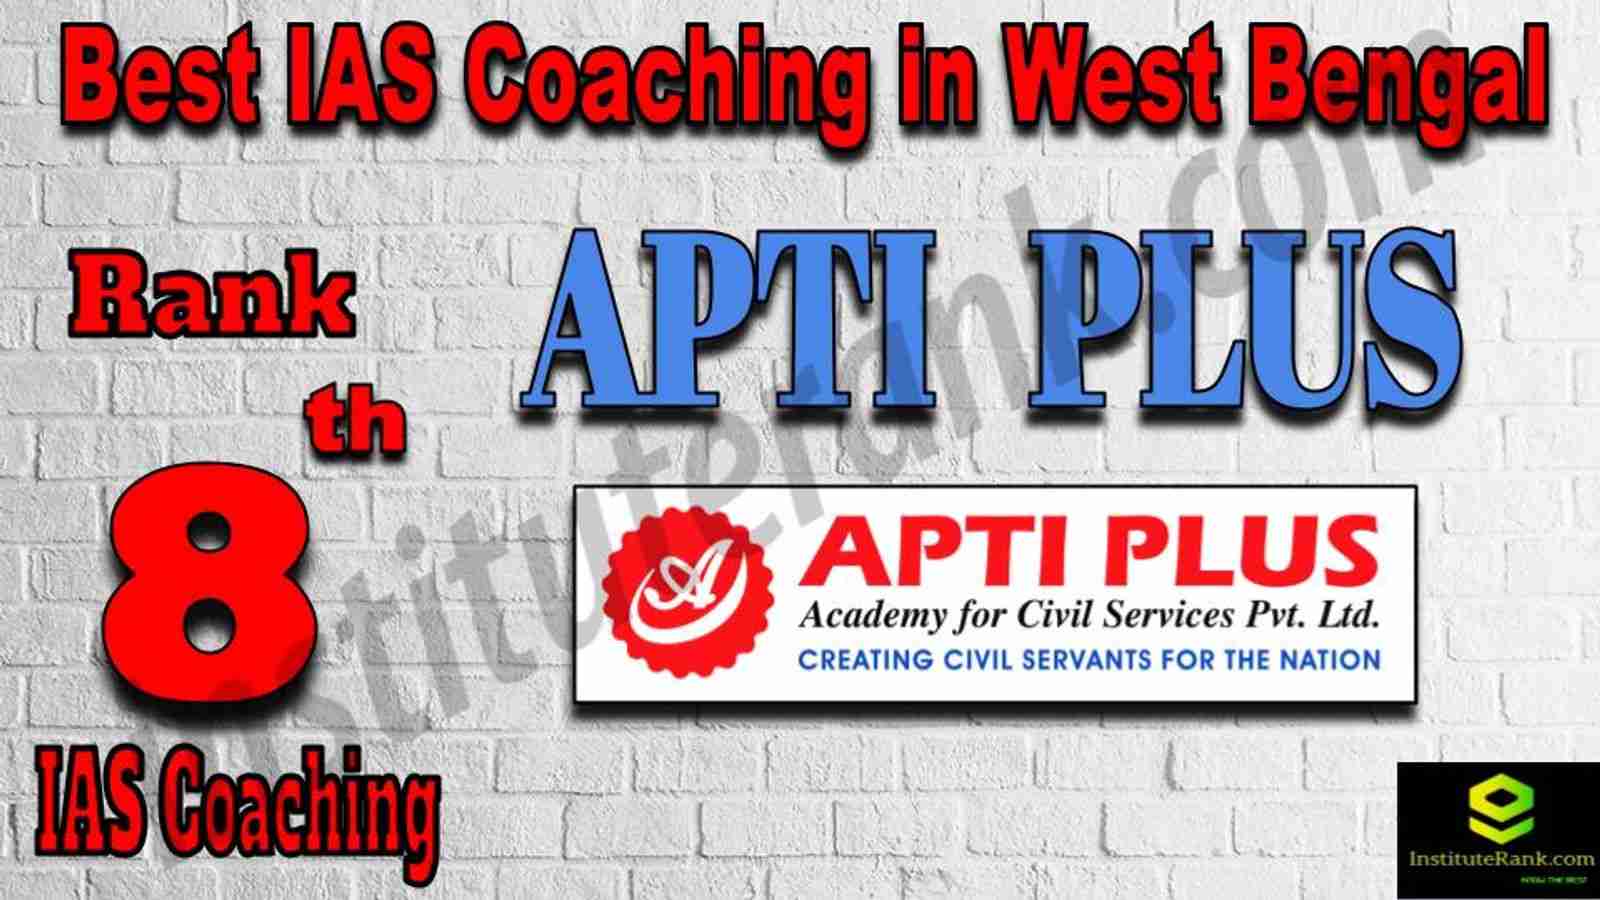 8th Best IAS Coaching in West Bengal